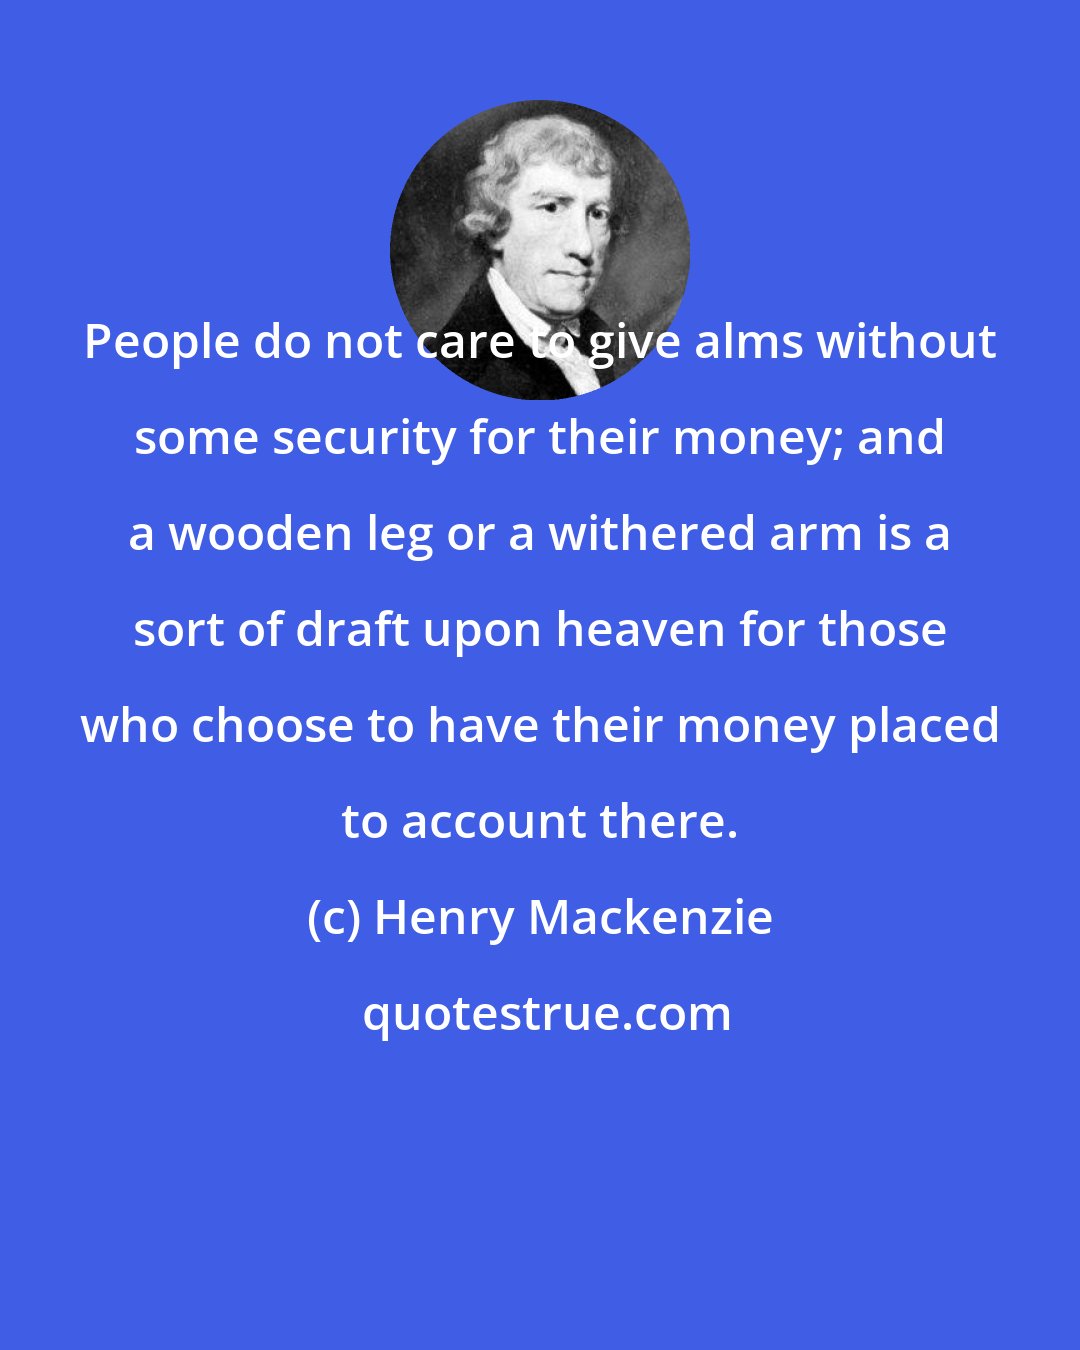 Henry Mackenzie: People do not care to give alms without some security for their money; and a wooden leg or a withered arm is a sort of draft upon heaven for those who choose to have their money placed to account there.